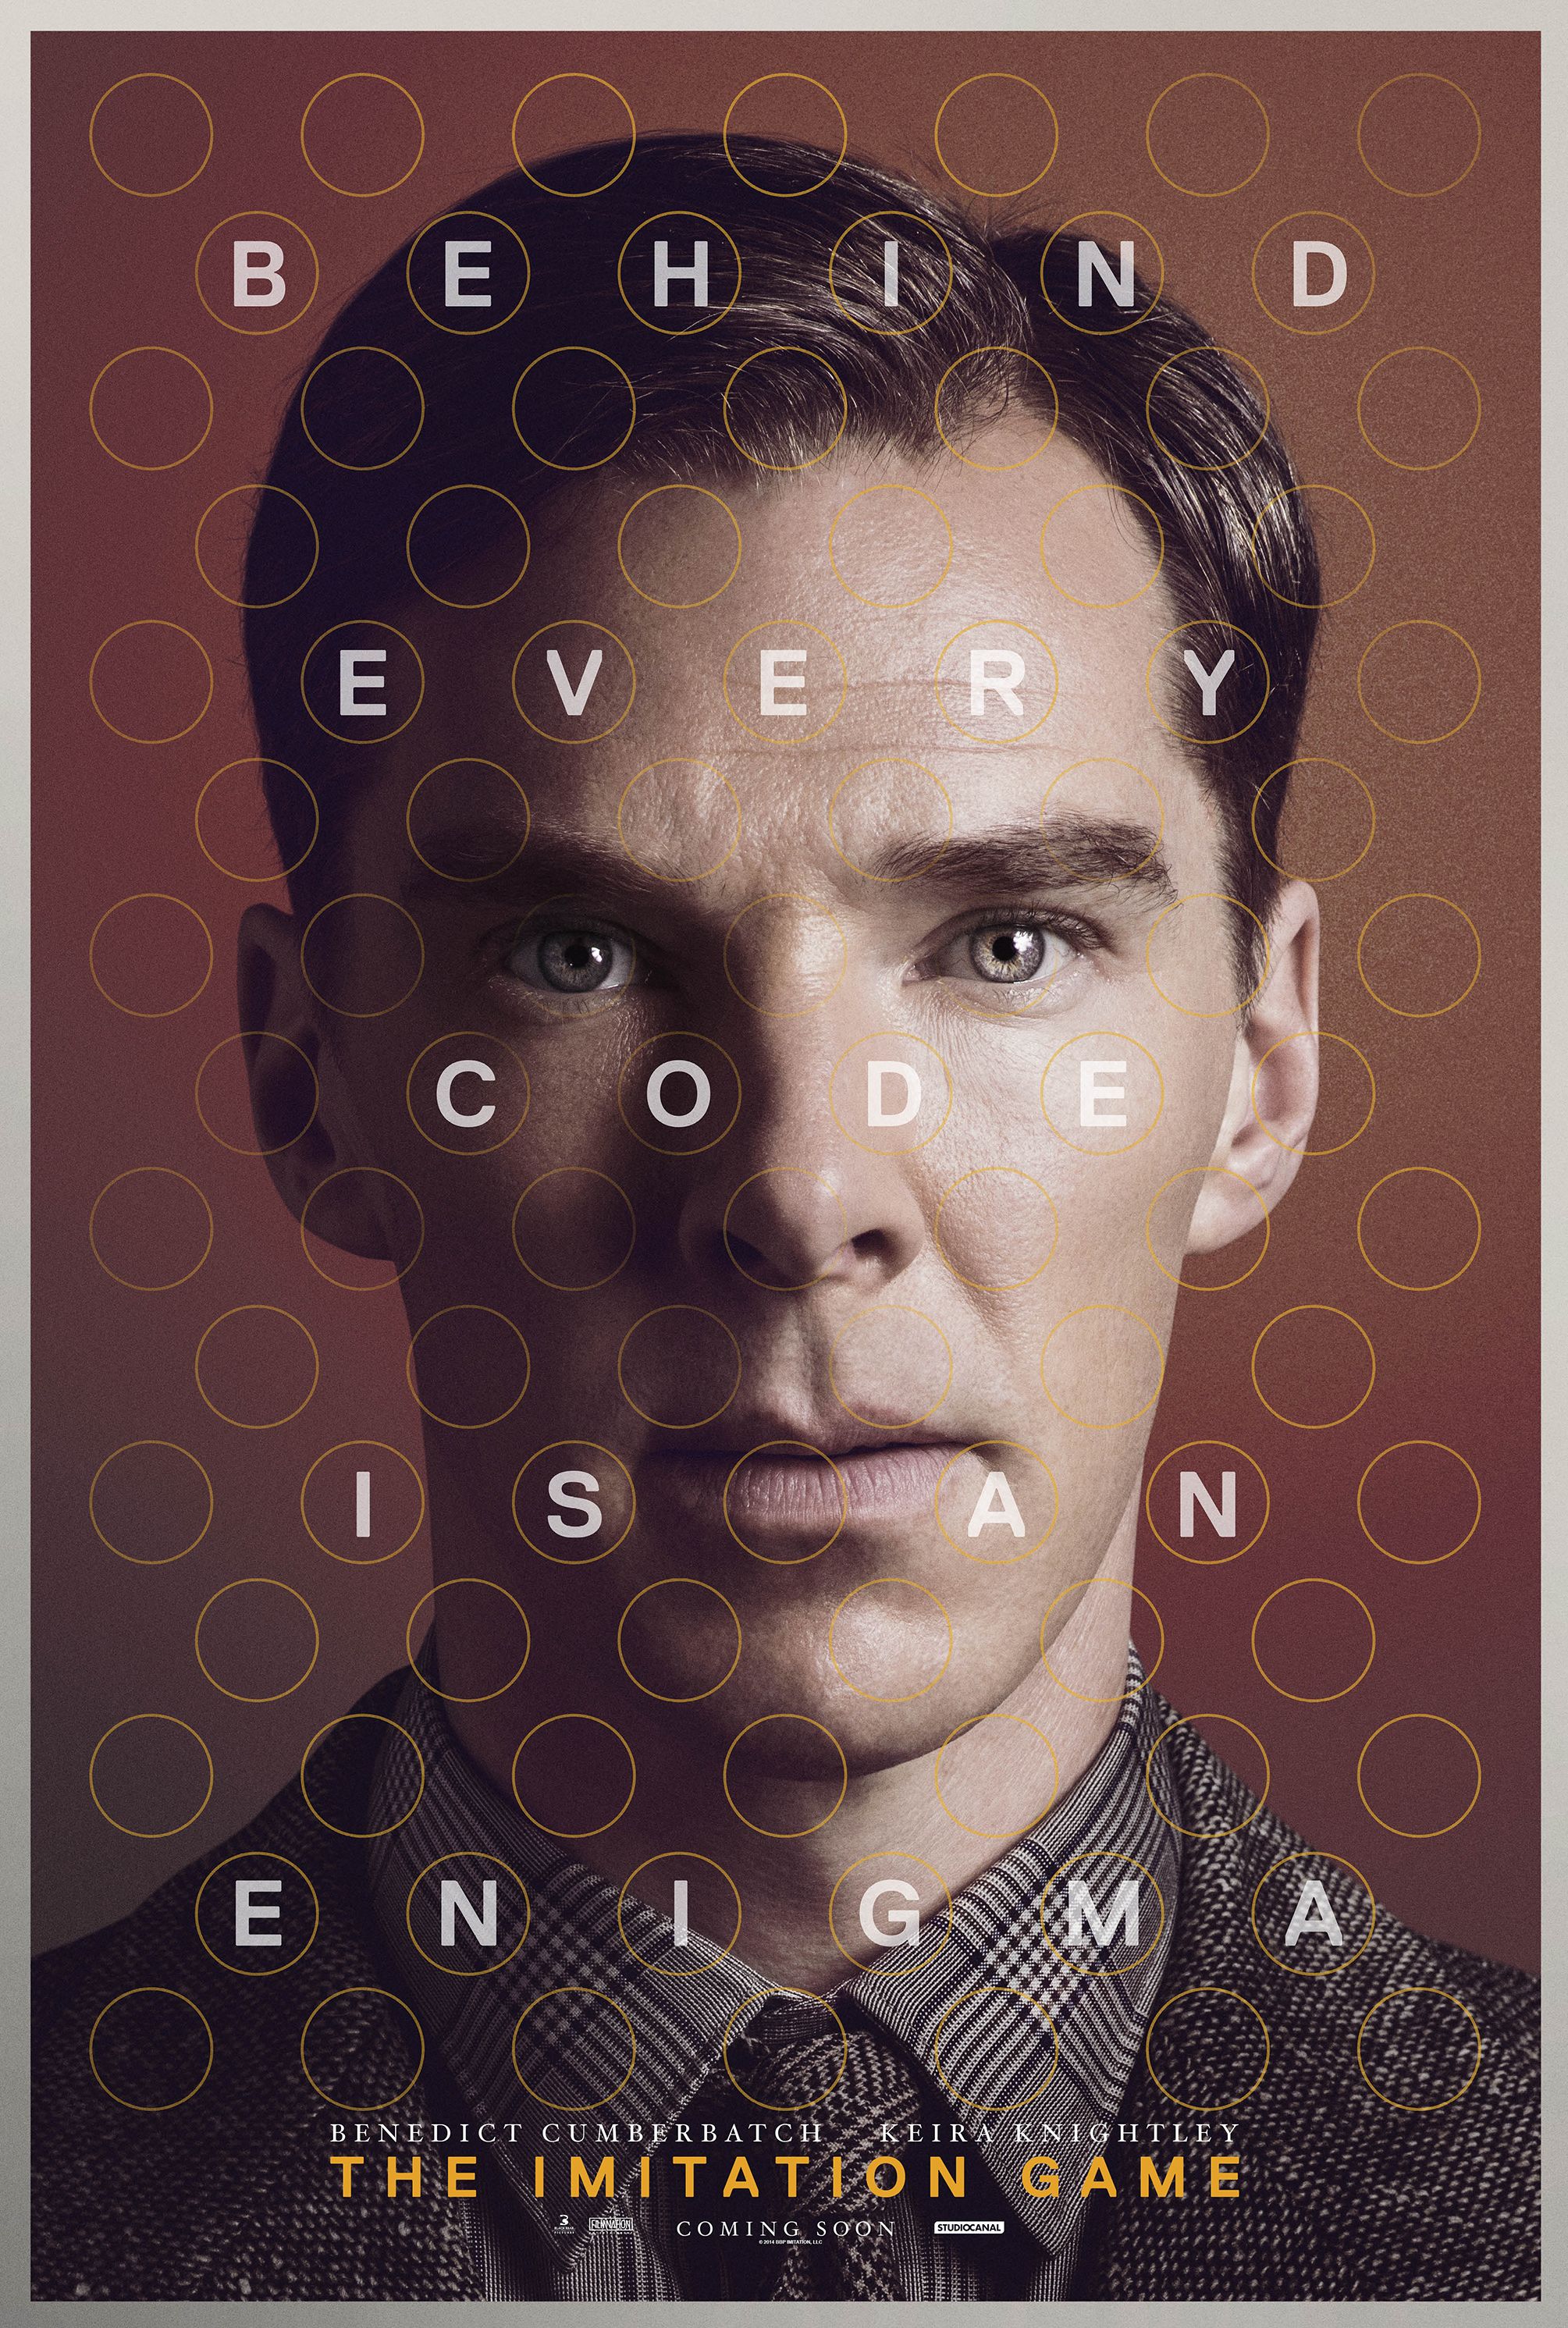 The Imitation Game poster: Behind Every Code Is An Enigma